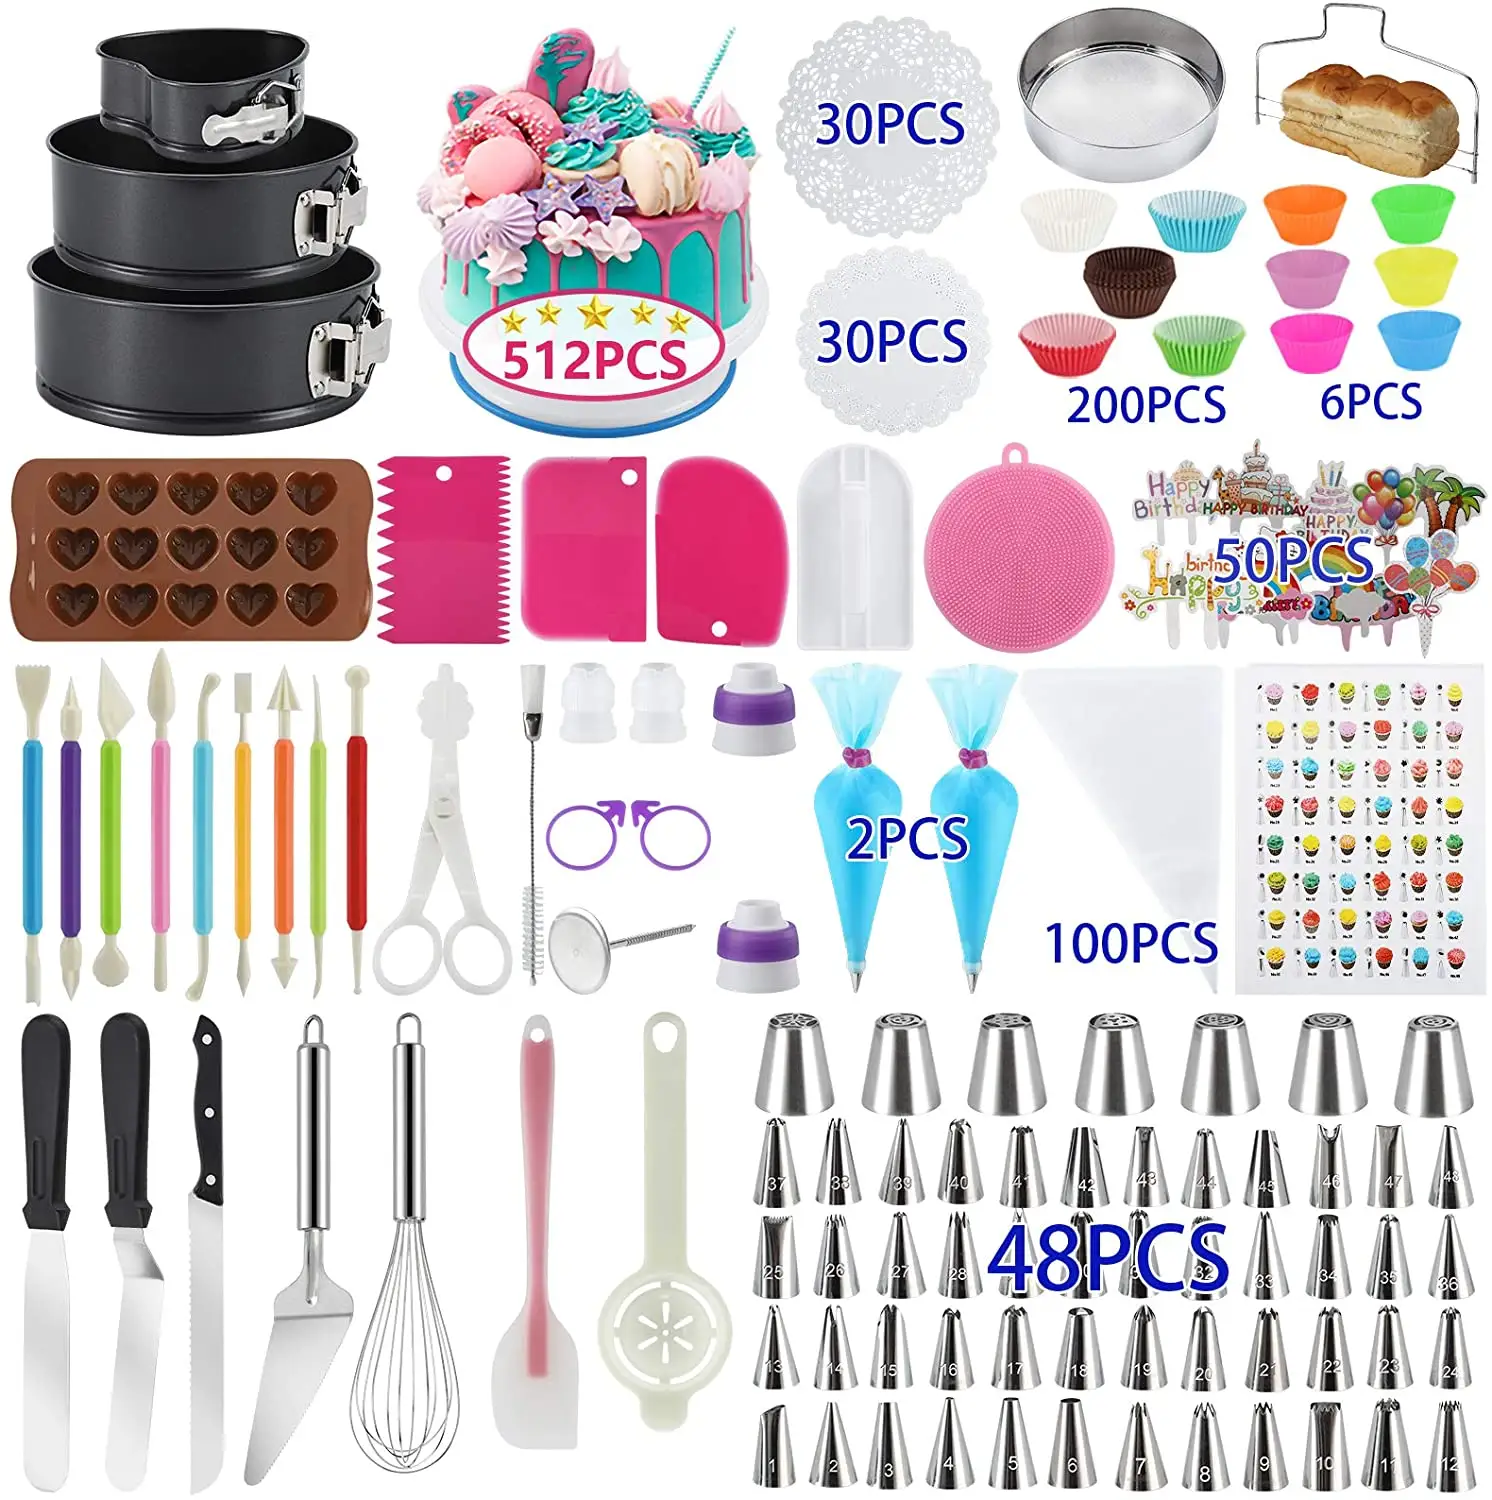 512Pcs Cake Decorating Kit with Non-Slip Cake Turntable Baking Supplies Baking Set for Beginners and Cake Lovers